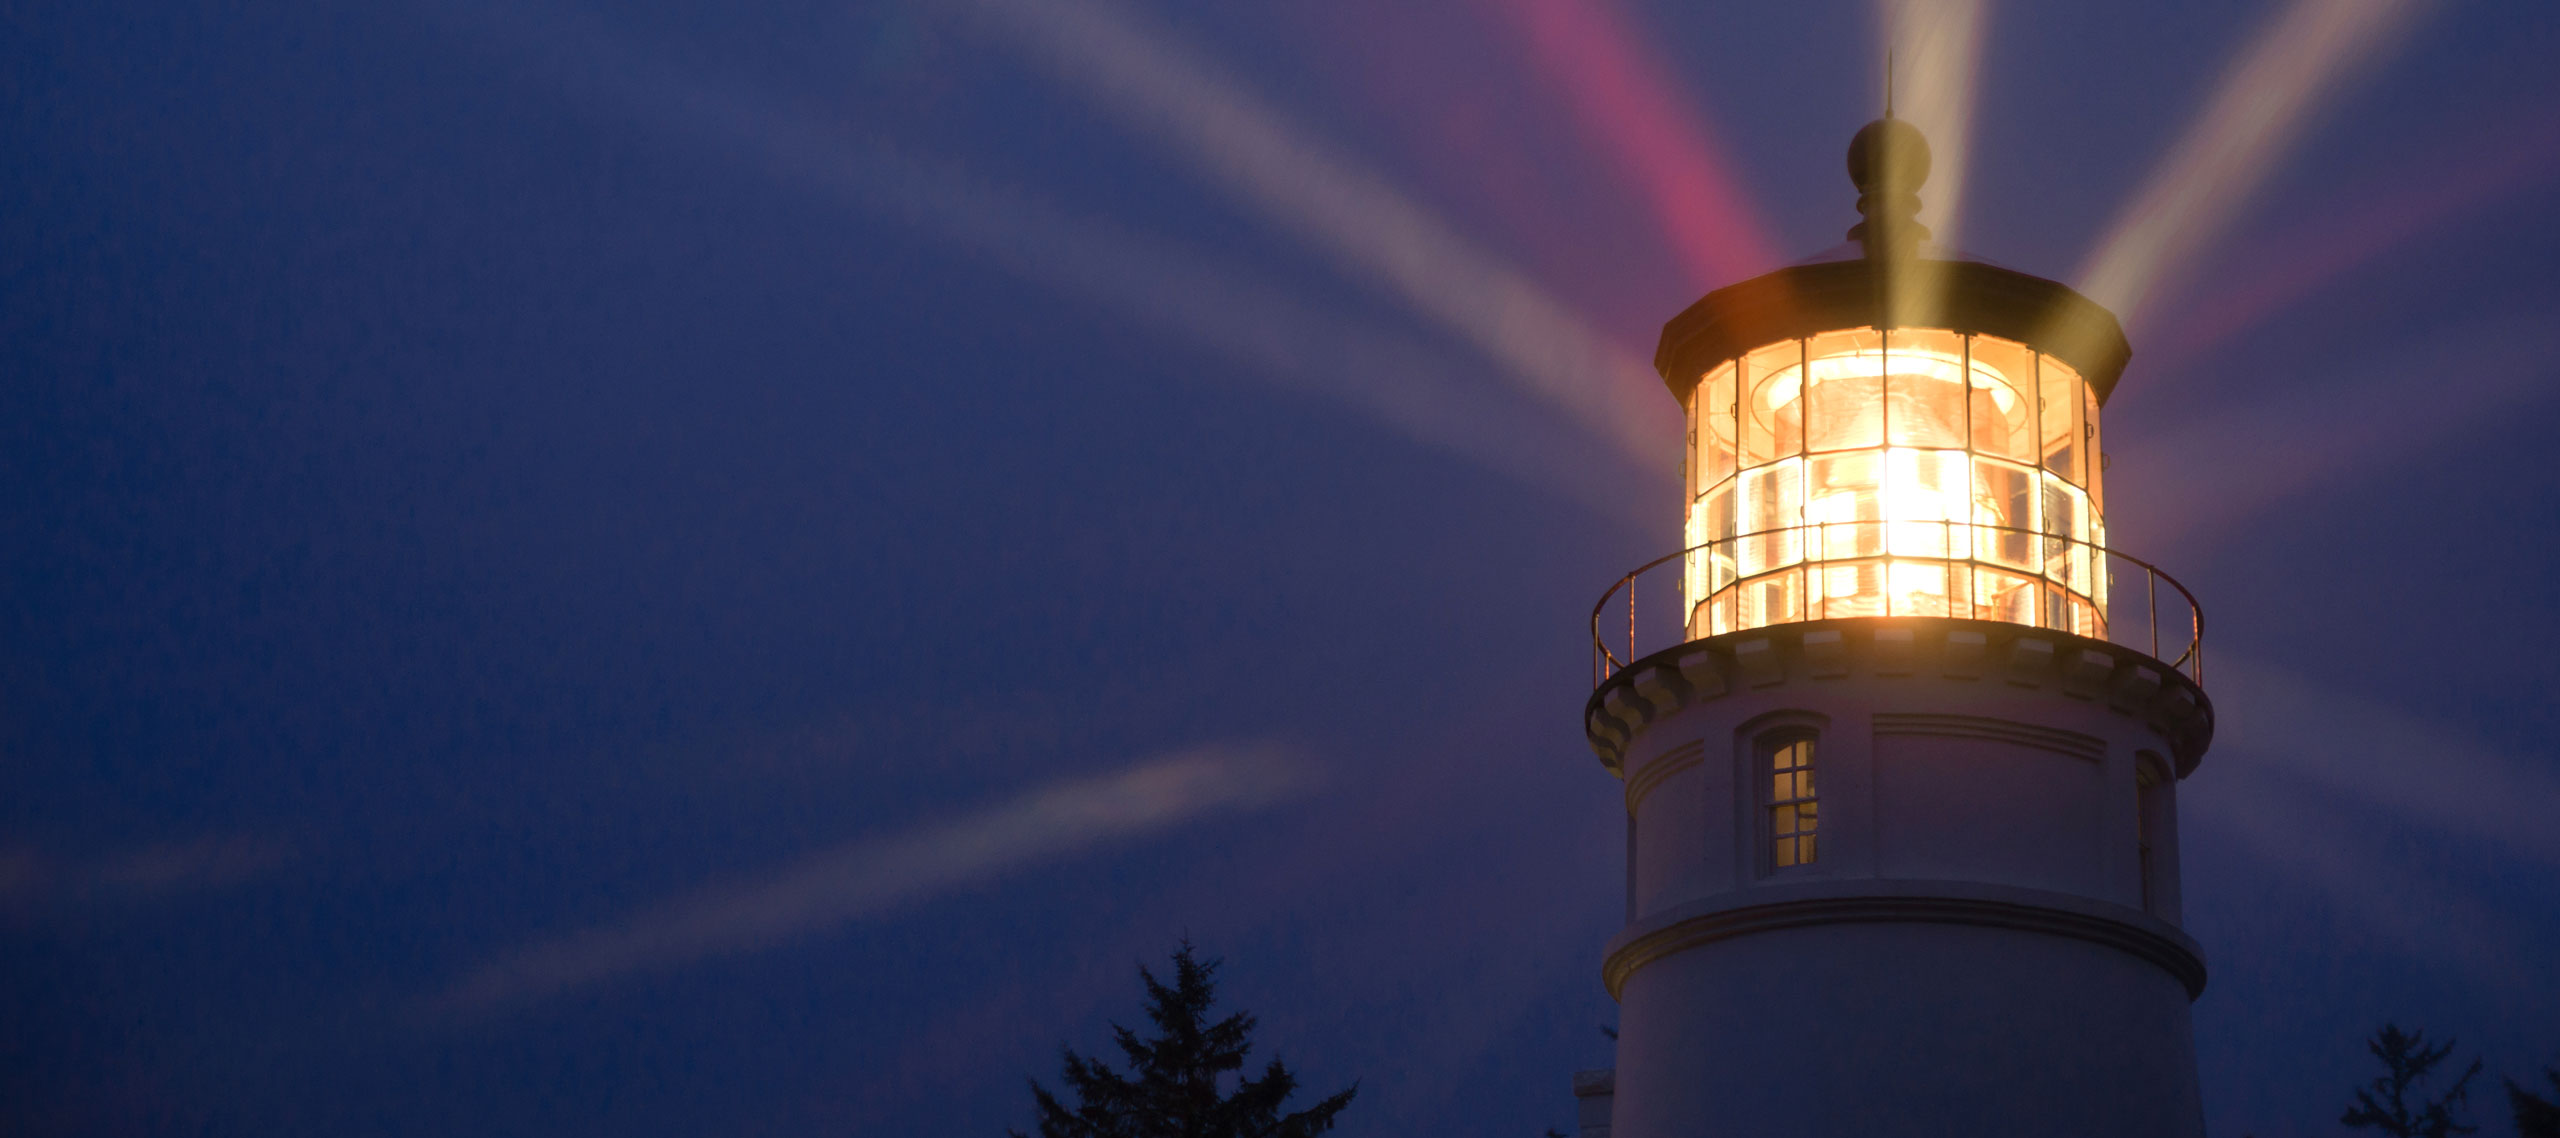 Lighthouse shining in the night symbolizes leadership guiding the way.